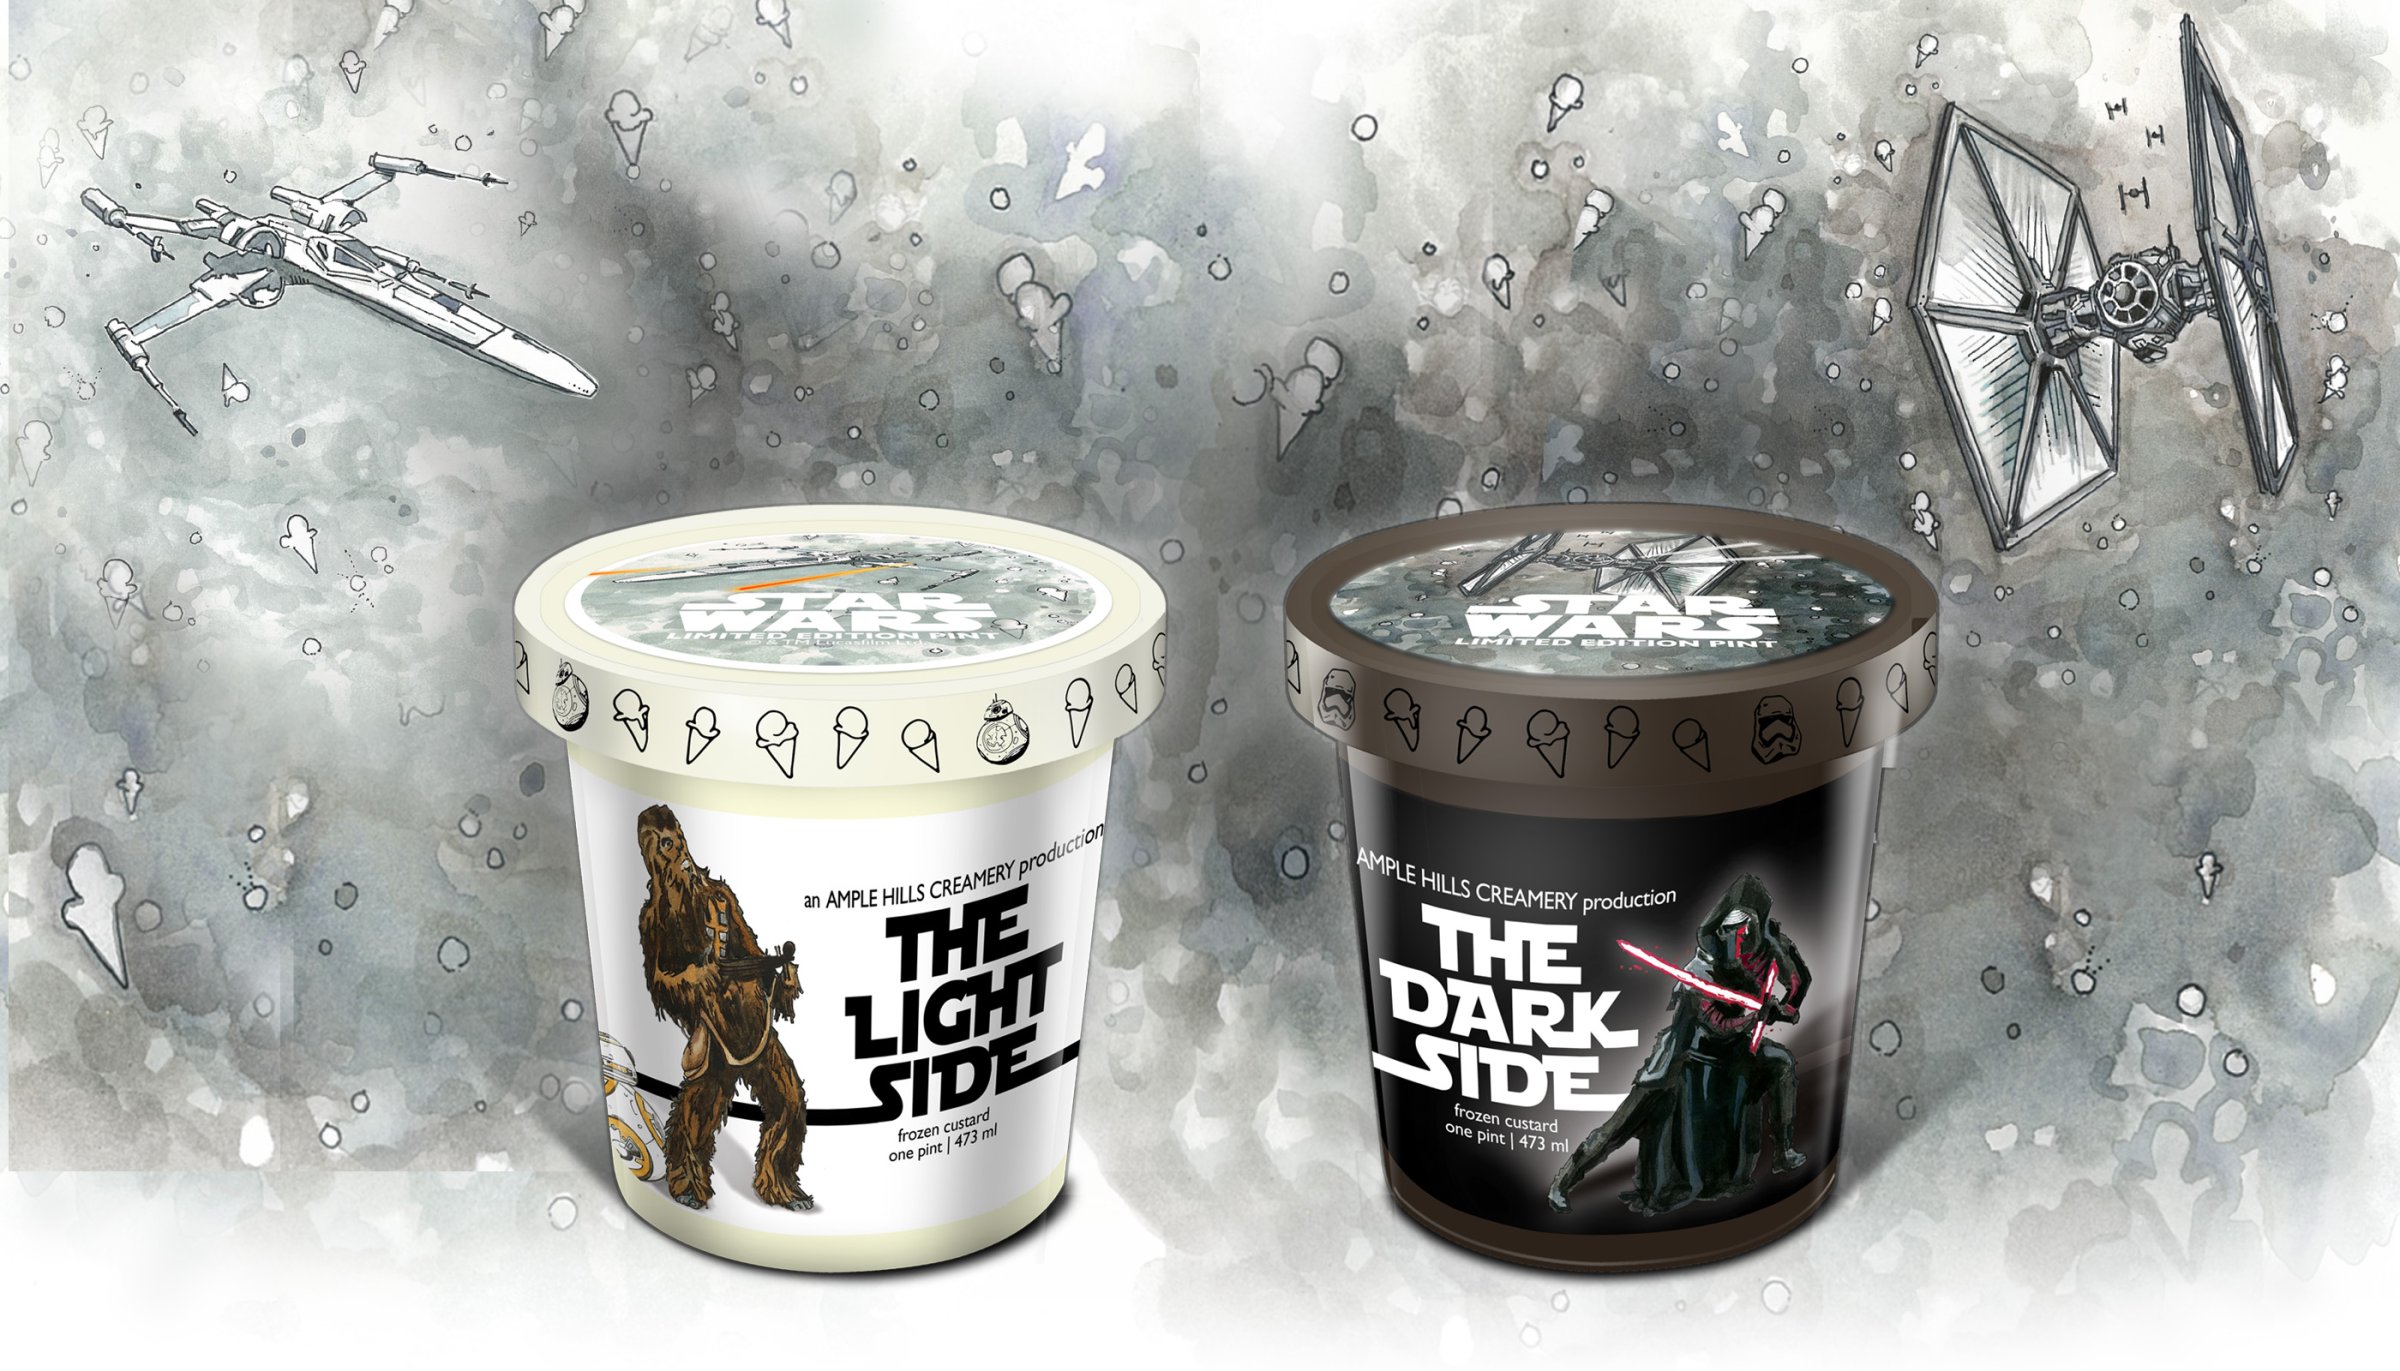 Ample Hills Creamery limited edition Star Wars ice cream flavors